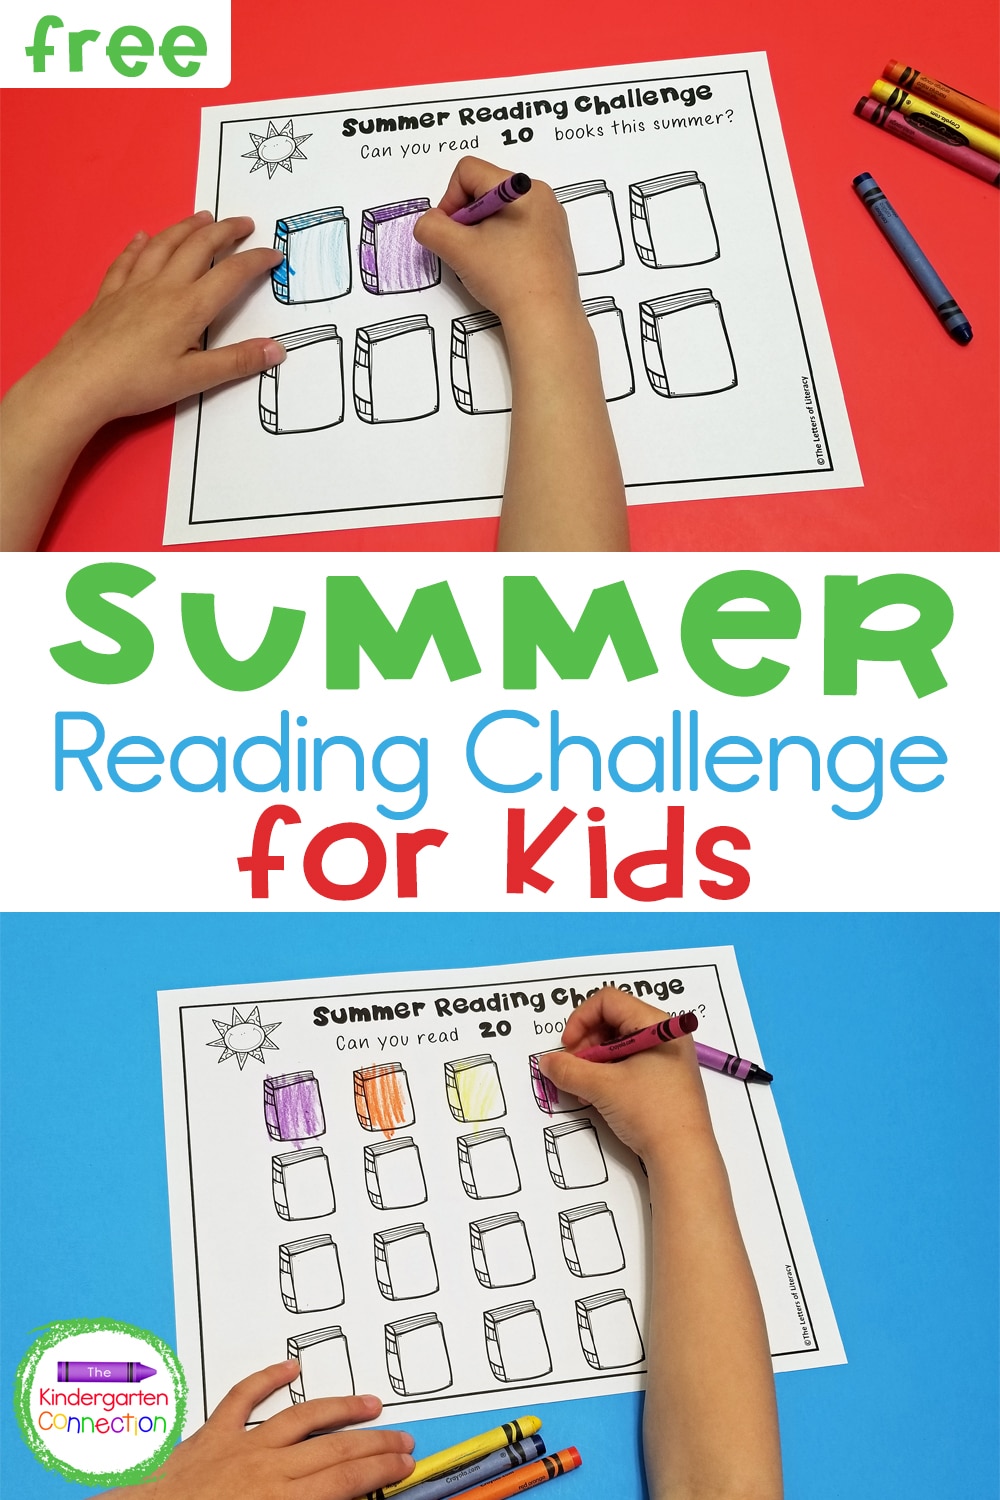 This free Summer Reading Challenge for Kids is a great way to beat the "summer slide" and promote reading over the summer break!